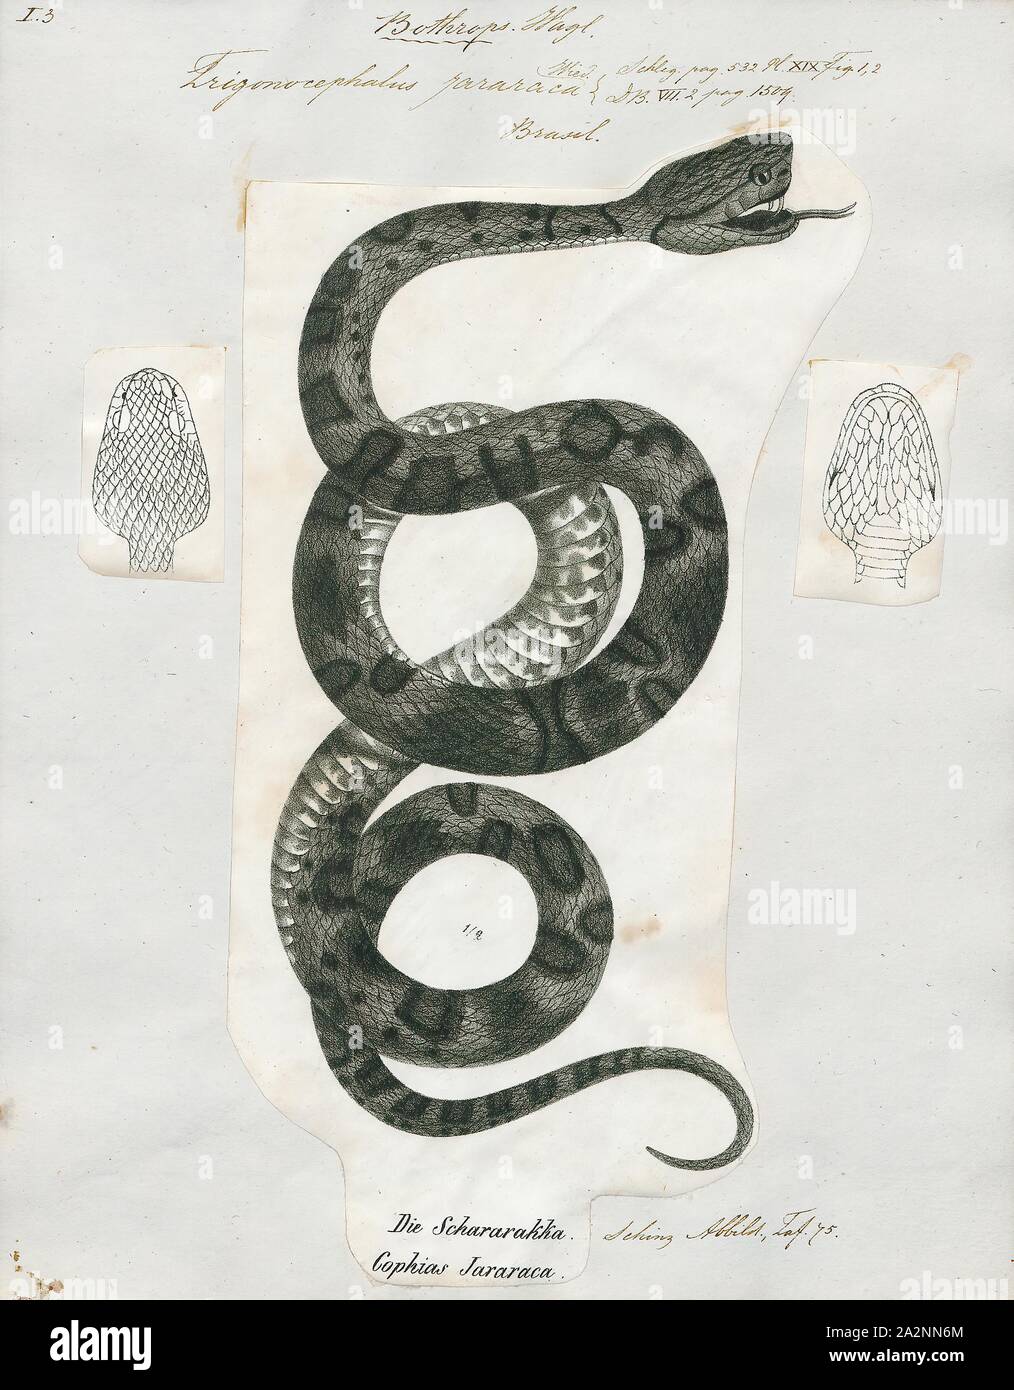 Trigonocephalus jararaca, Print, Bothrops jararaca — known as the jararaca (or the yarara) — is a species of pit viper endemic to southern Brazil, Paraguay, and northern Argentina. The specific name, jararaca, is derived from the Tupi words yarará and ca, which mean 'large snake'. Within its geographic range, it is often abundant and is an important cause of snakebite. No subspecies are currently recognized., 1700-1880 Stock Photo